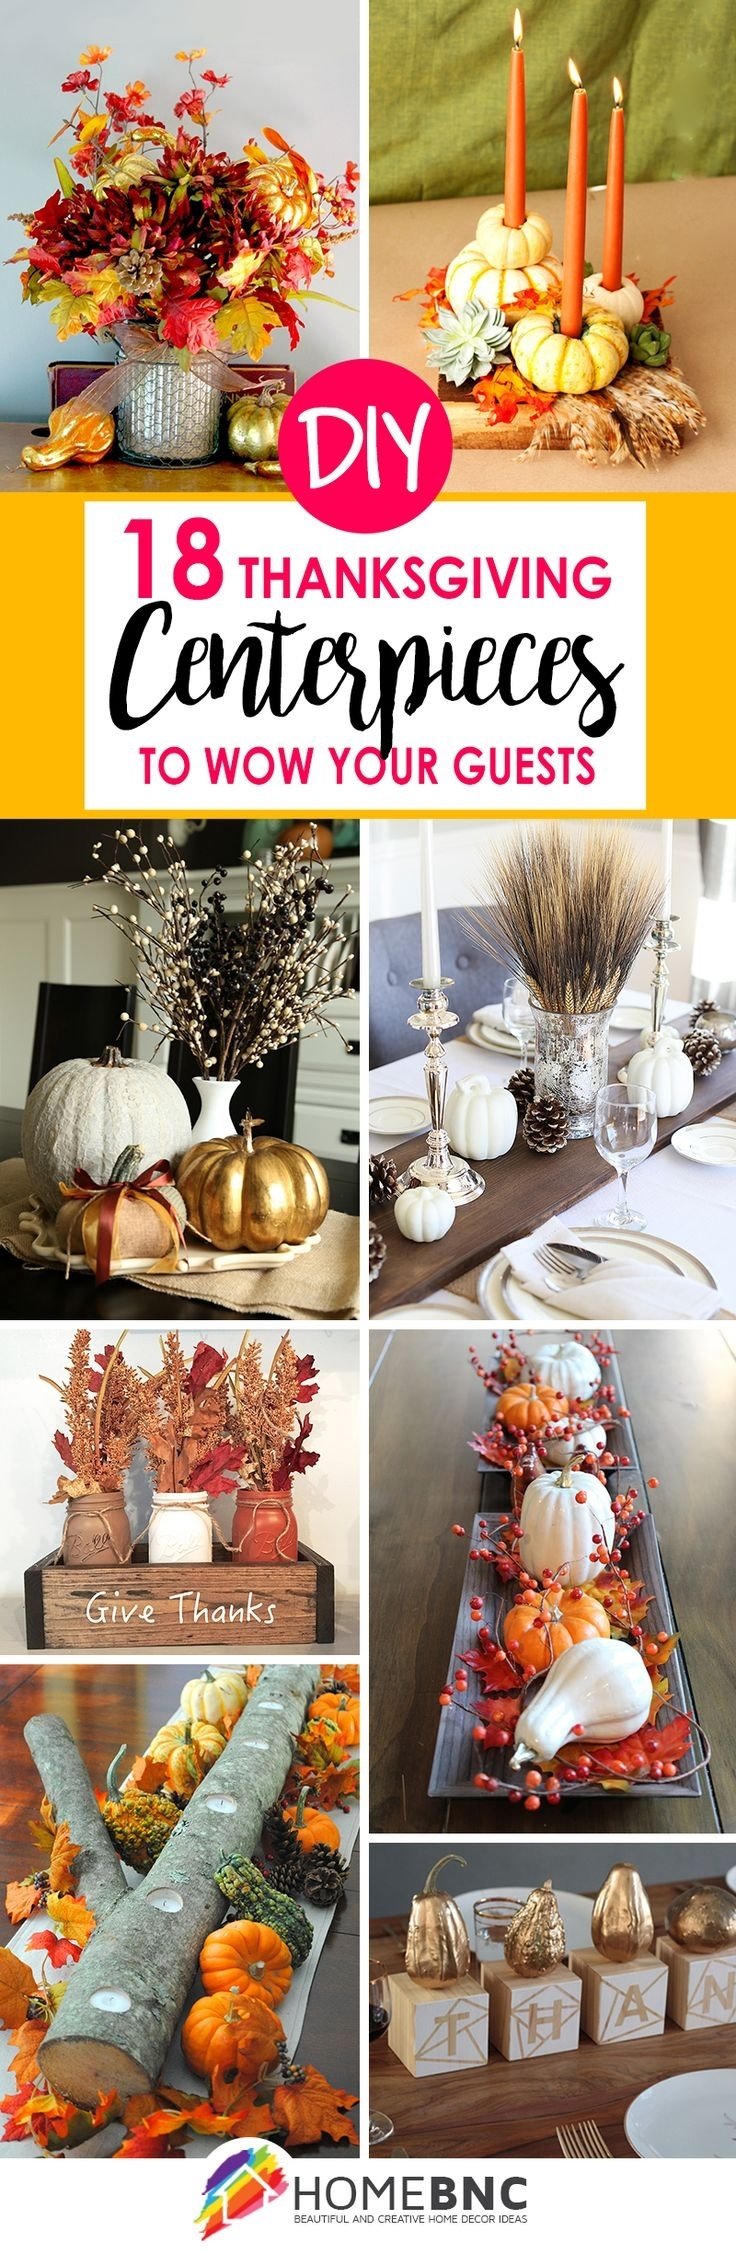 10 Spectacular Ideas For Thanksgiving Table Decorations thanksgiving table ideasdecor adventures planters fat and 2022